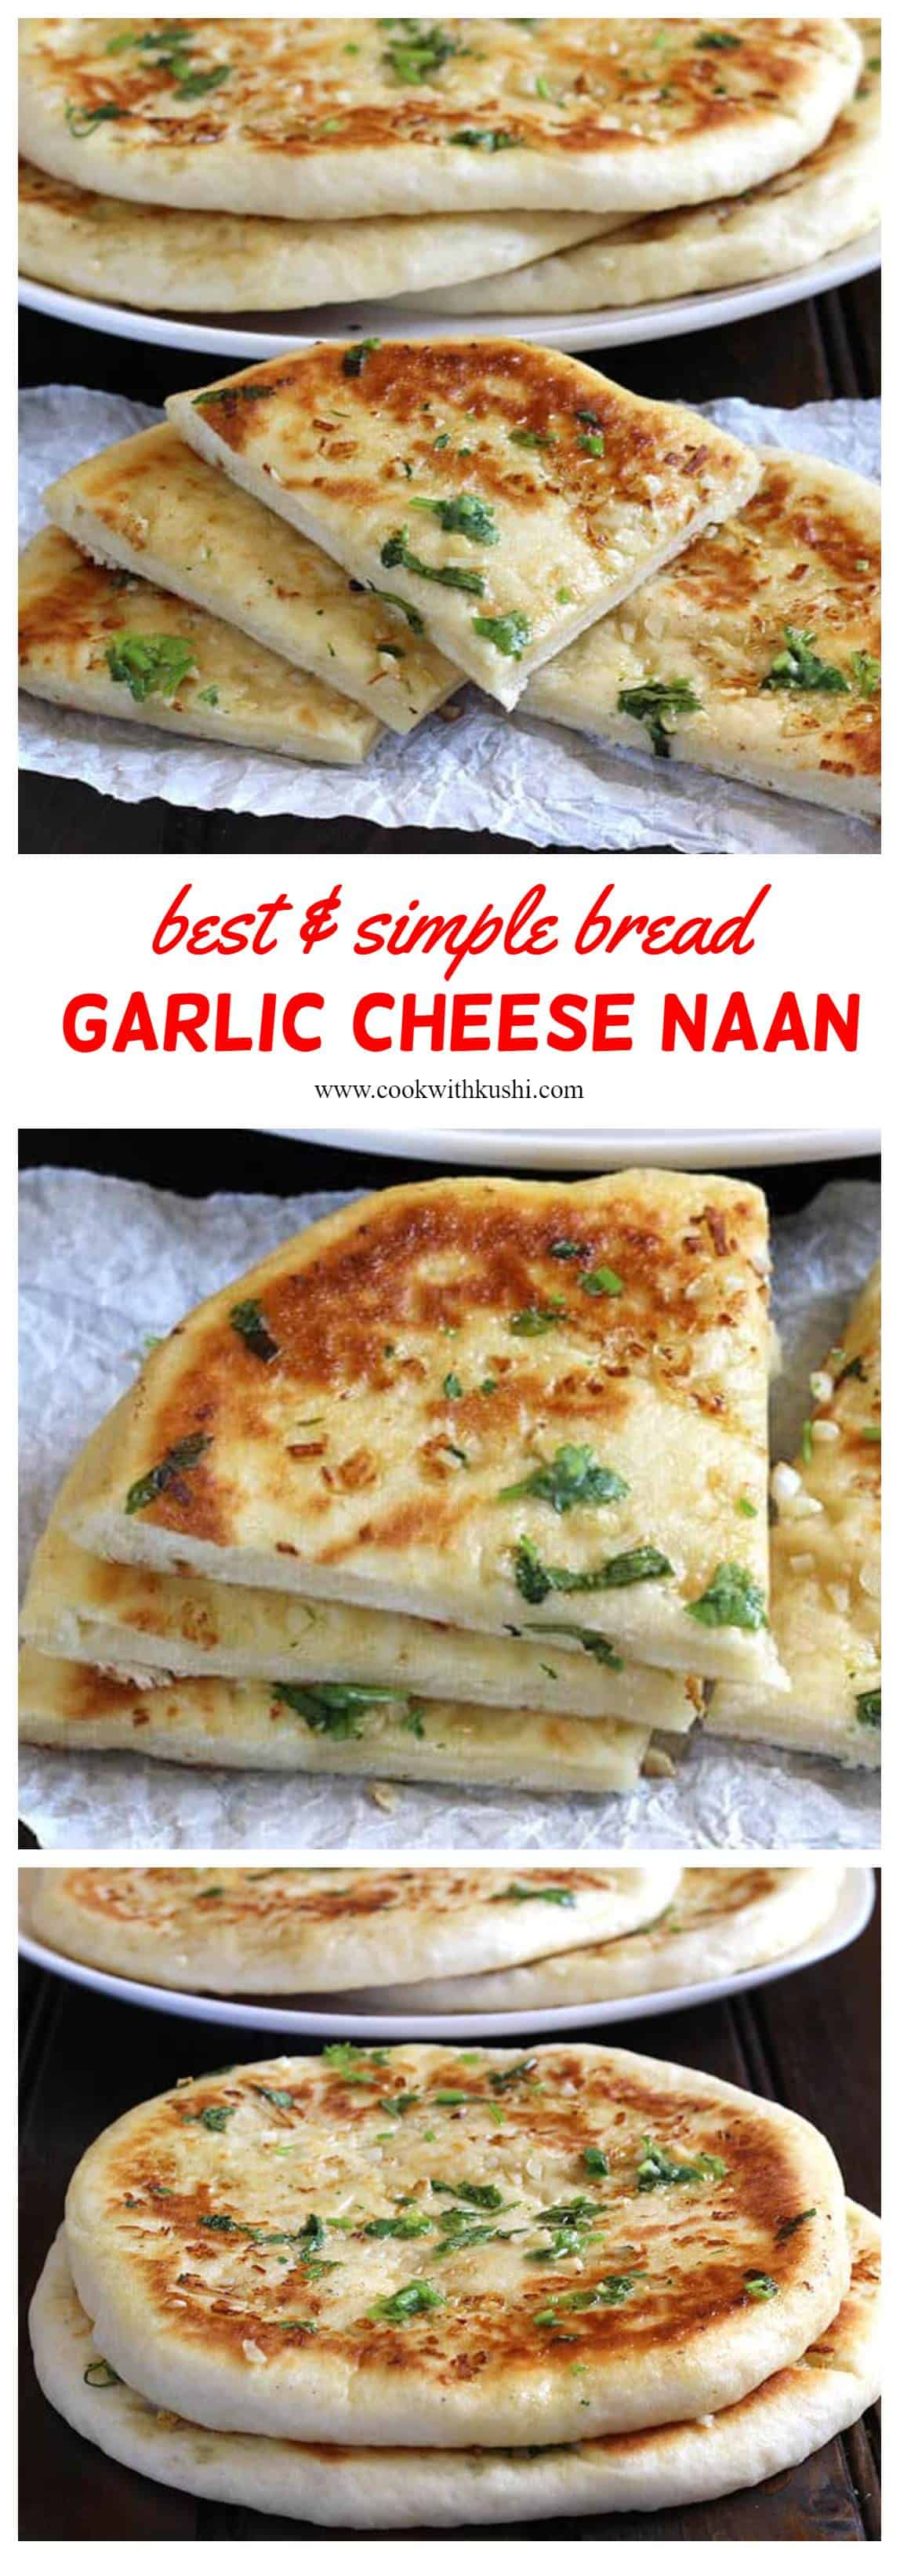 super soft and chewy, flavorful homemade flatbread recipe that is cheesy, garlicky and buttery. The minced garlic and melted cheese in every single bite makes this naan bread simply irresistible. #garlicnaan #cheesenaan #naan #stuffednaan #paneernaan #restaurantstyle #dhabastyle #garlicbutternaan #indianrecipes #naanandcurry #naanandroti #dinenrrecipes #dinnerideas #lunchrecipes 